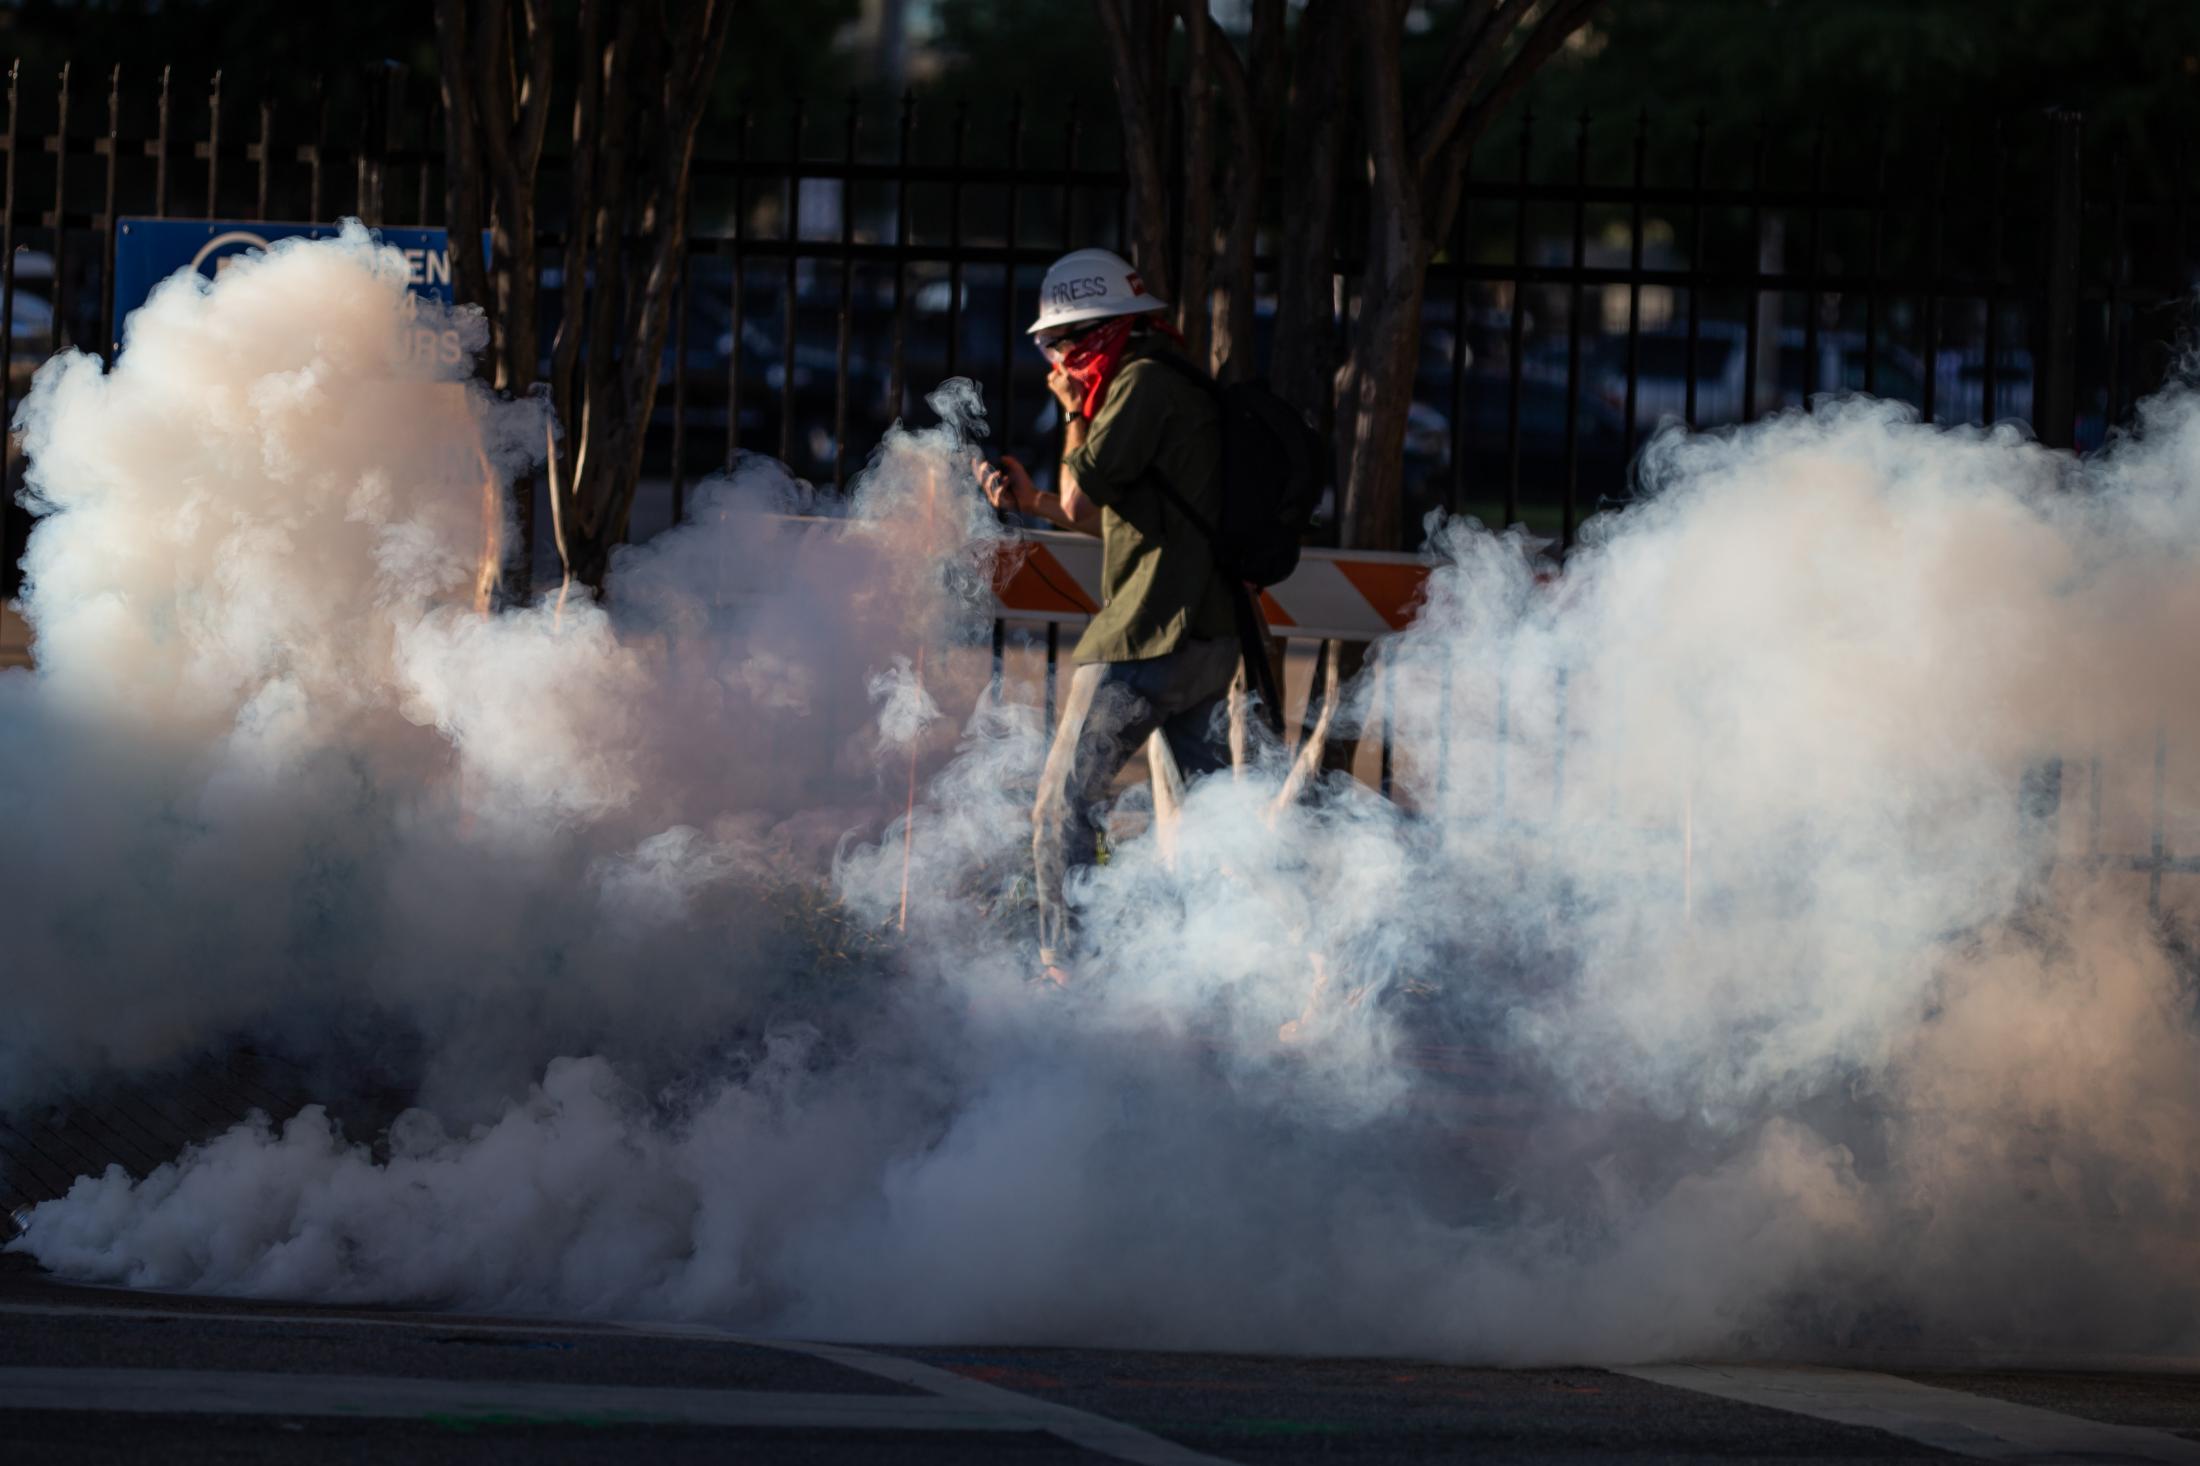 Unrest Dallas - A member of the press runs away from a cloud of tear gas...